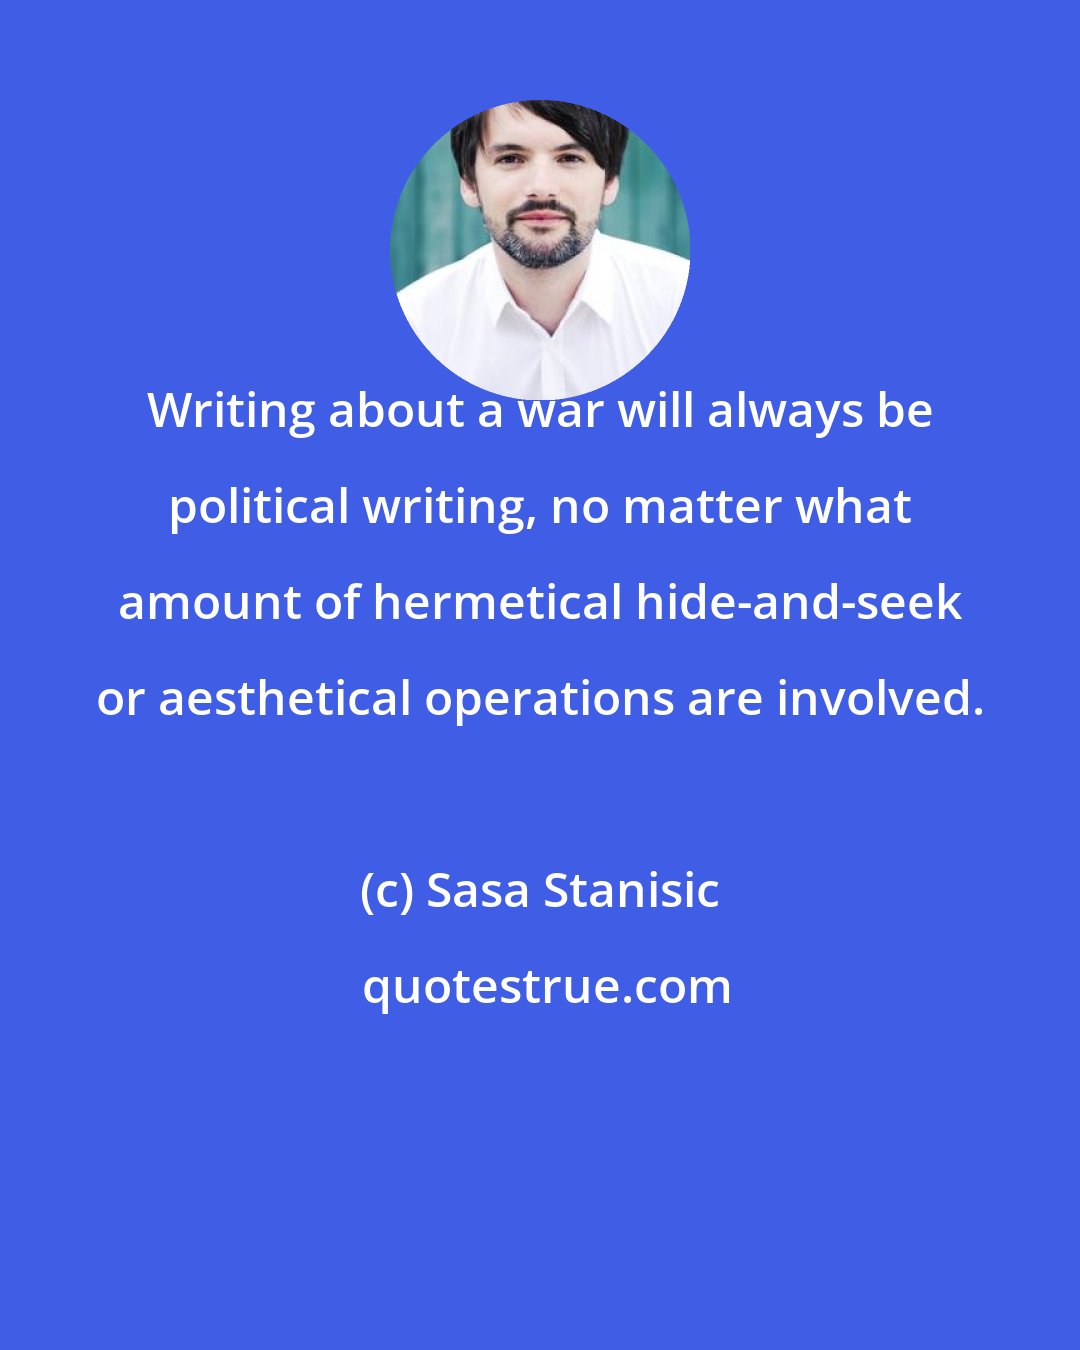 Sasa Stanisic: Writing about a war will always be political writing, no matter what amount of hermetical hide-and-seek or aesthetical operations are involved.